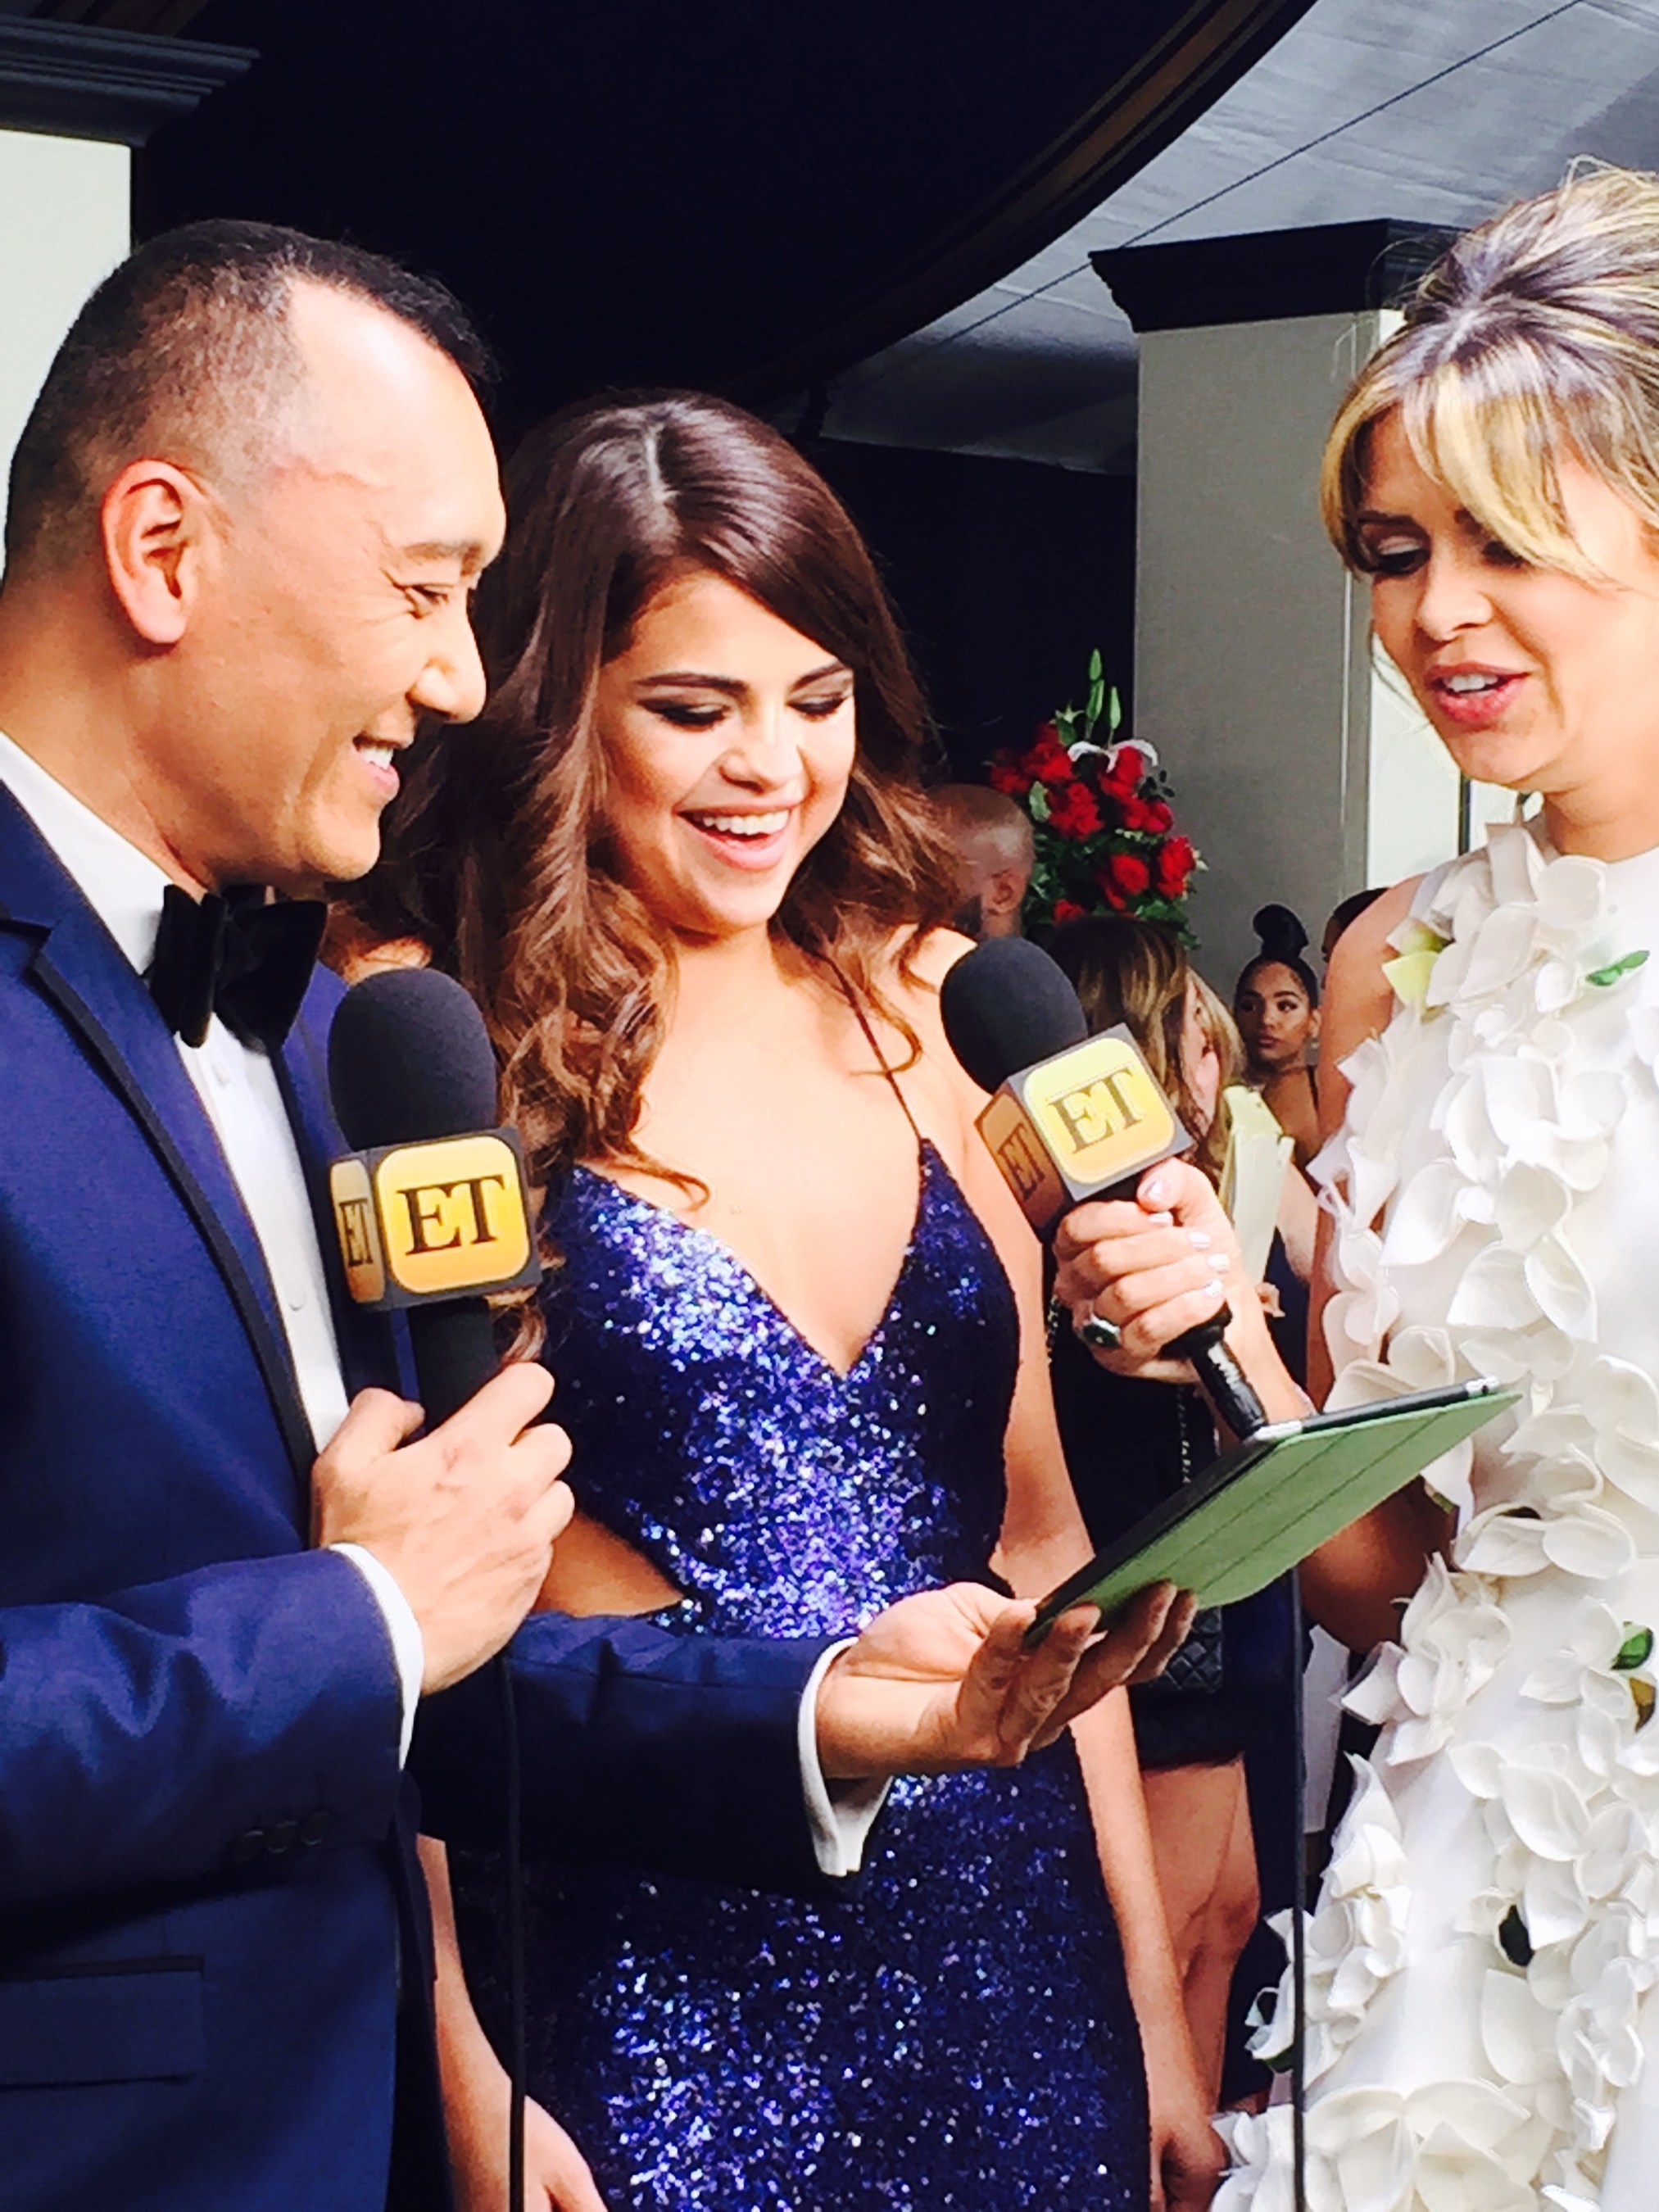 Live from the 58th Annual Grammy's, Entertainment Tonight host, Carly Steel and fashion expert, Joe Zee caught up with singer and actress, Selena Gomez. ET utilized LiveU technology to capture all of the red carpet activities at the Staples Center in Los Angeles.